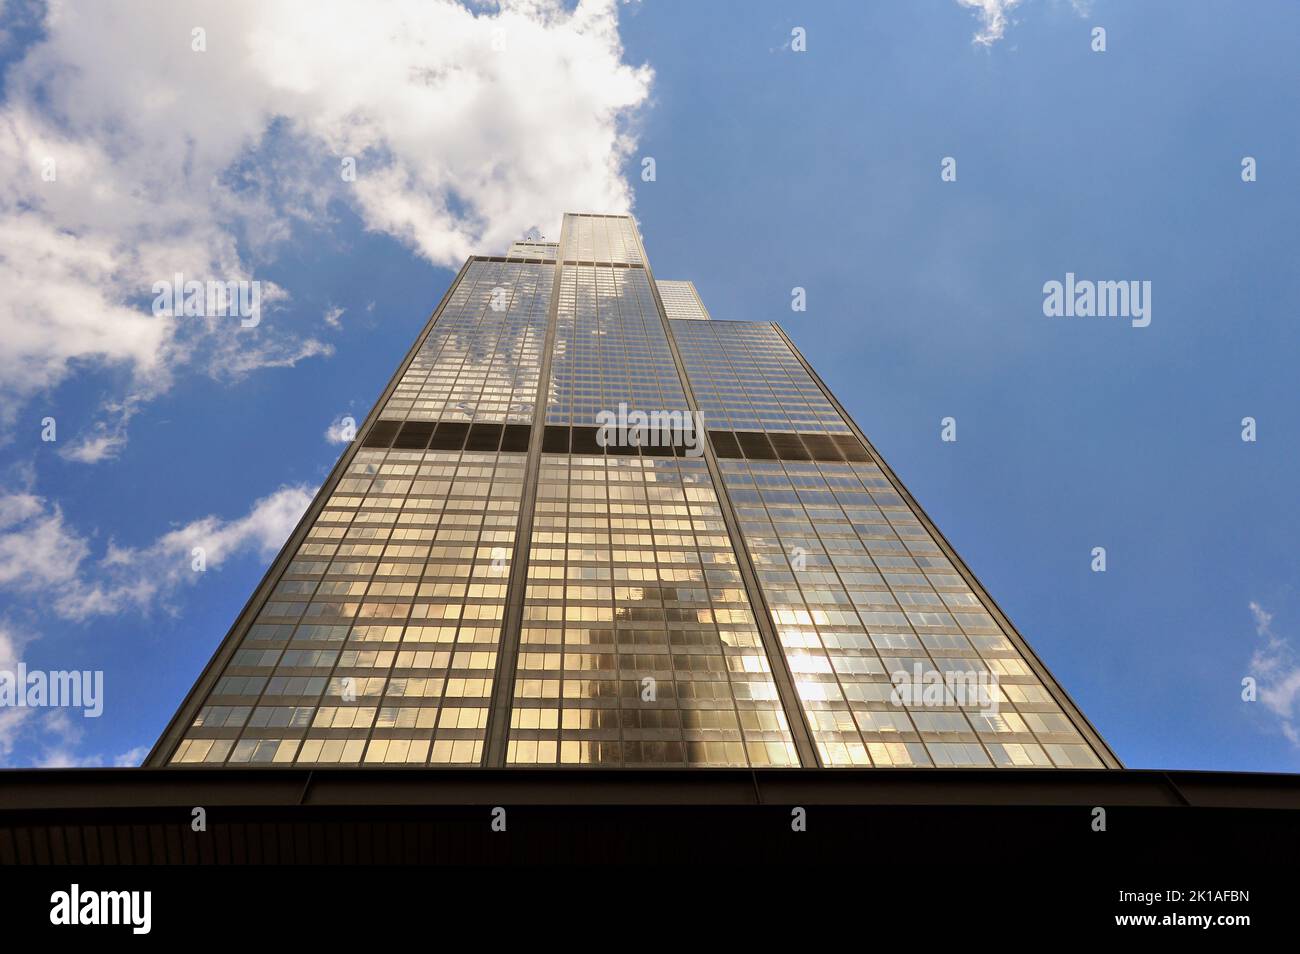 Chicago, Illinois, USA. An extreme view at the Willis Tower (formerly Sears Tower), once the tallest building in the world. Stock Photo